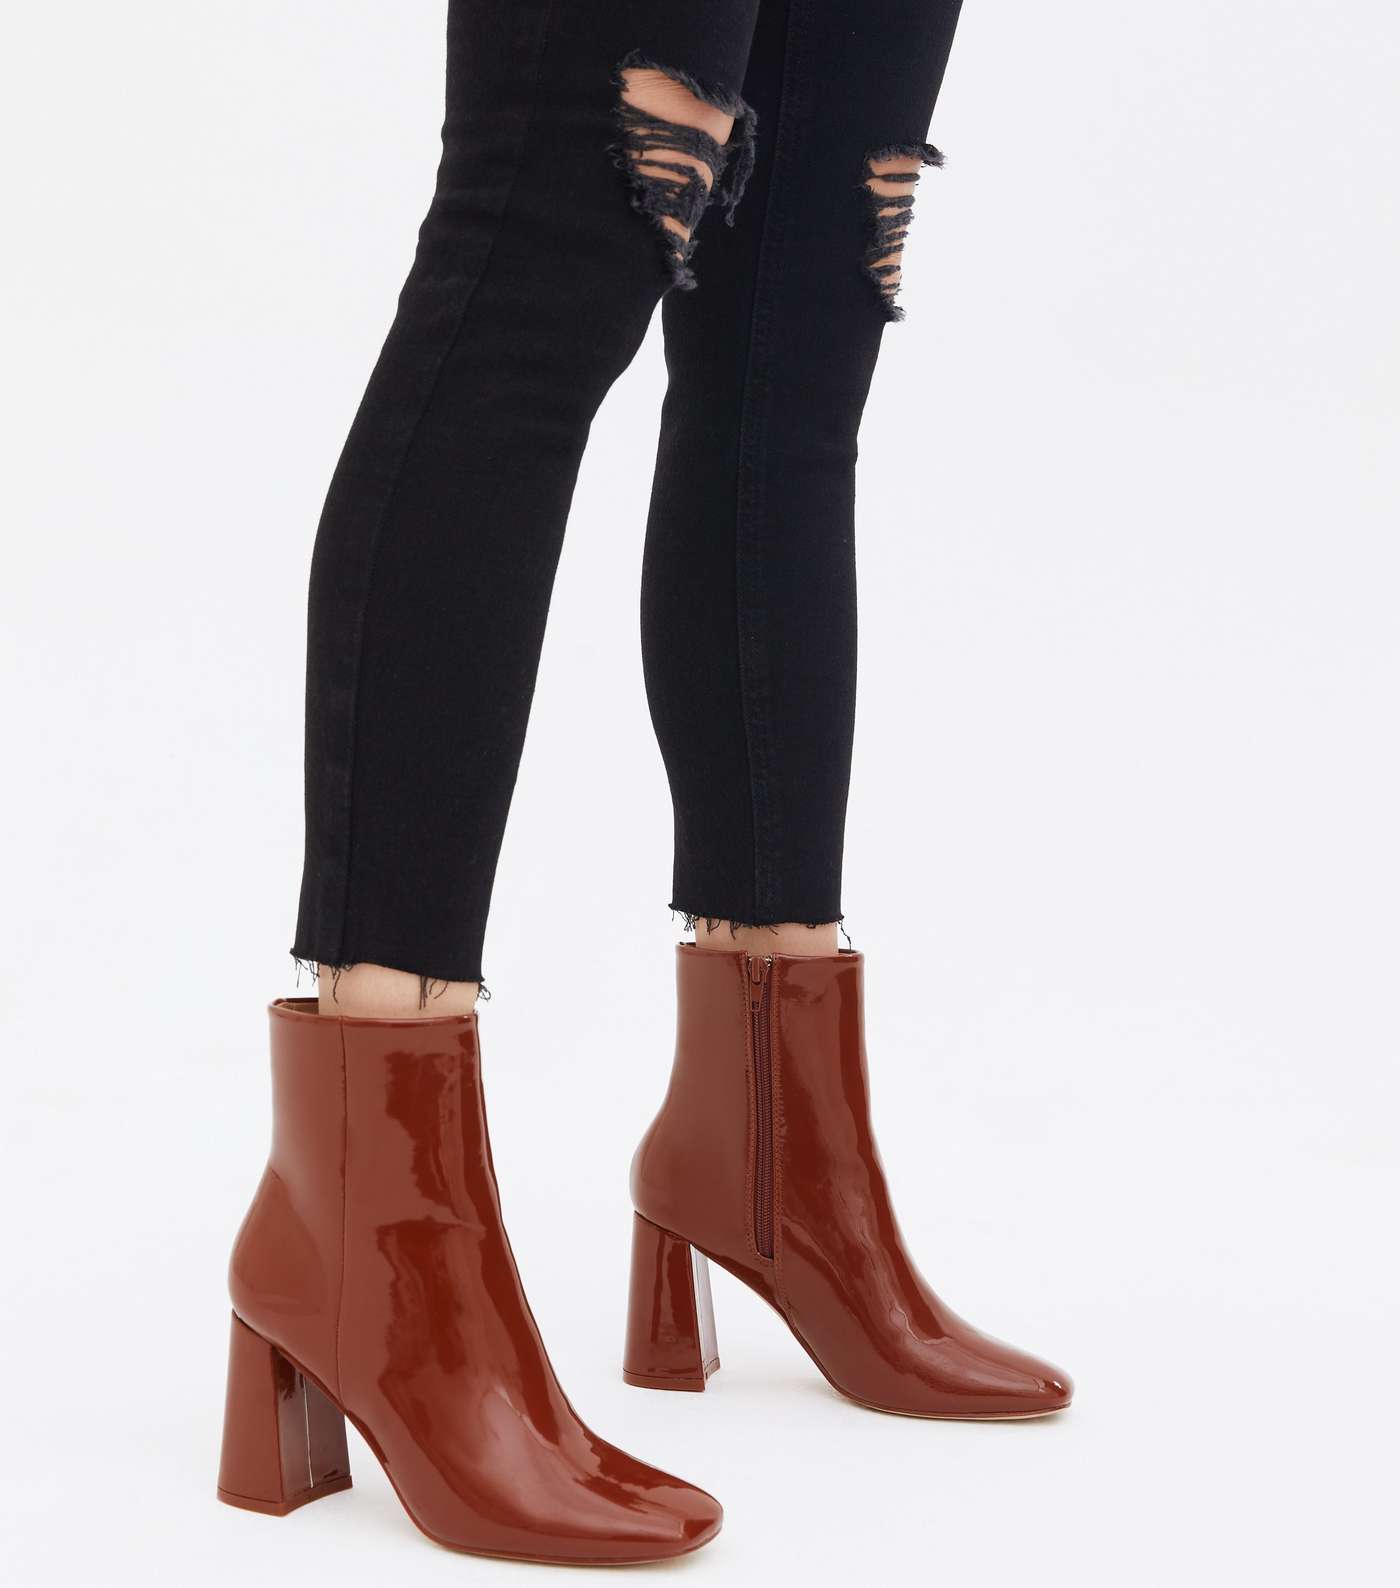 Rust Patent Square Toe Flared Block Heel Ankle Boots Image 2